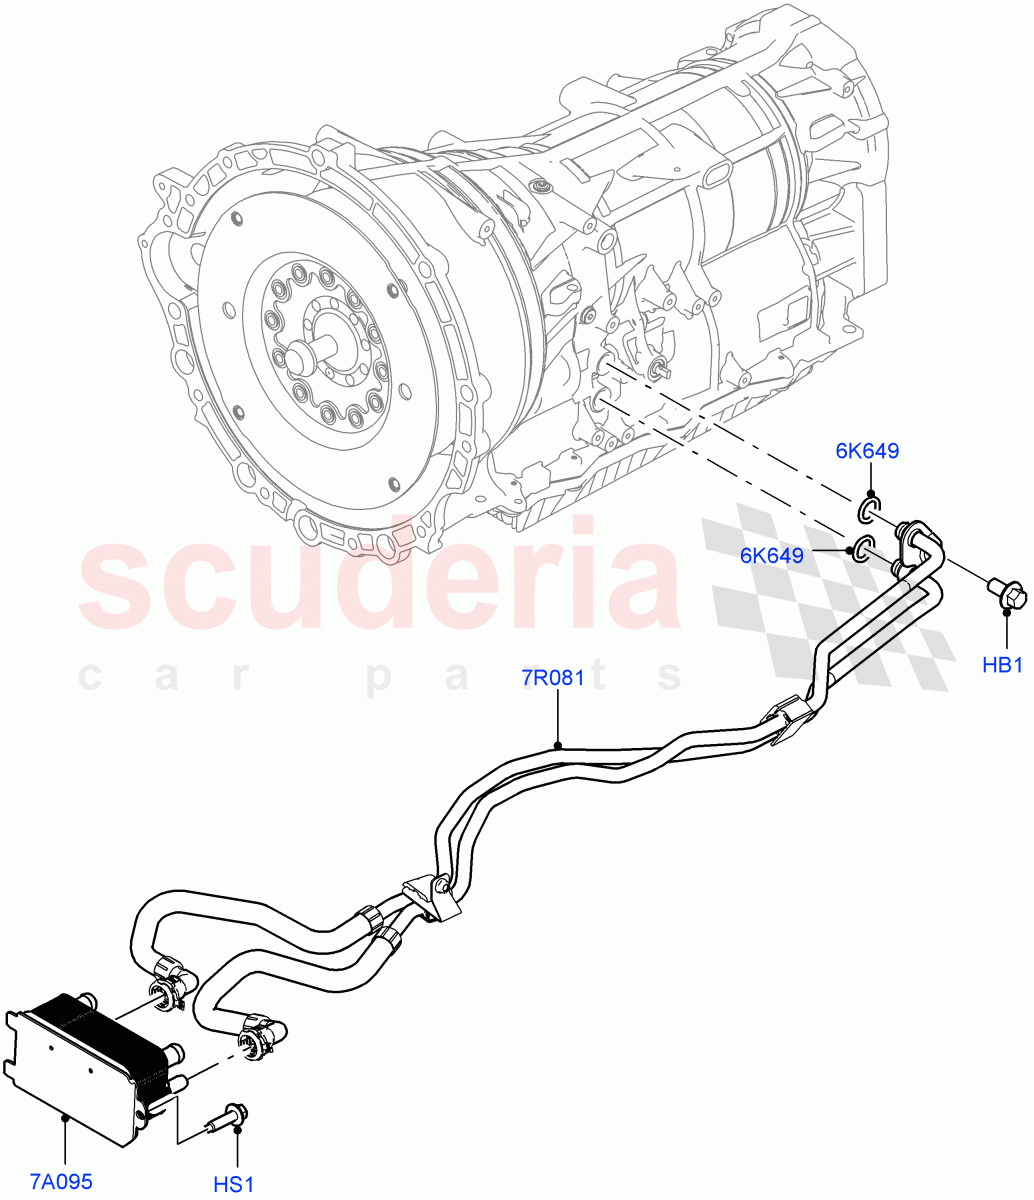 Transmission Cooling Systems(Solihull Plant Build)(2.0L I4 High DOHC AJ200 Petrol,8 Speed Auto Trans ZF 8HP45)((V)FROMJA000001) of Land Rover Land Rover Discovery 5 (2017+) [2.0 Turbo Diesel]